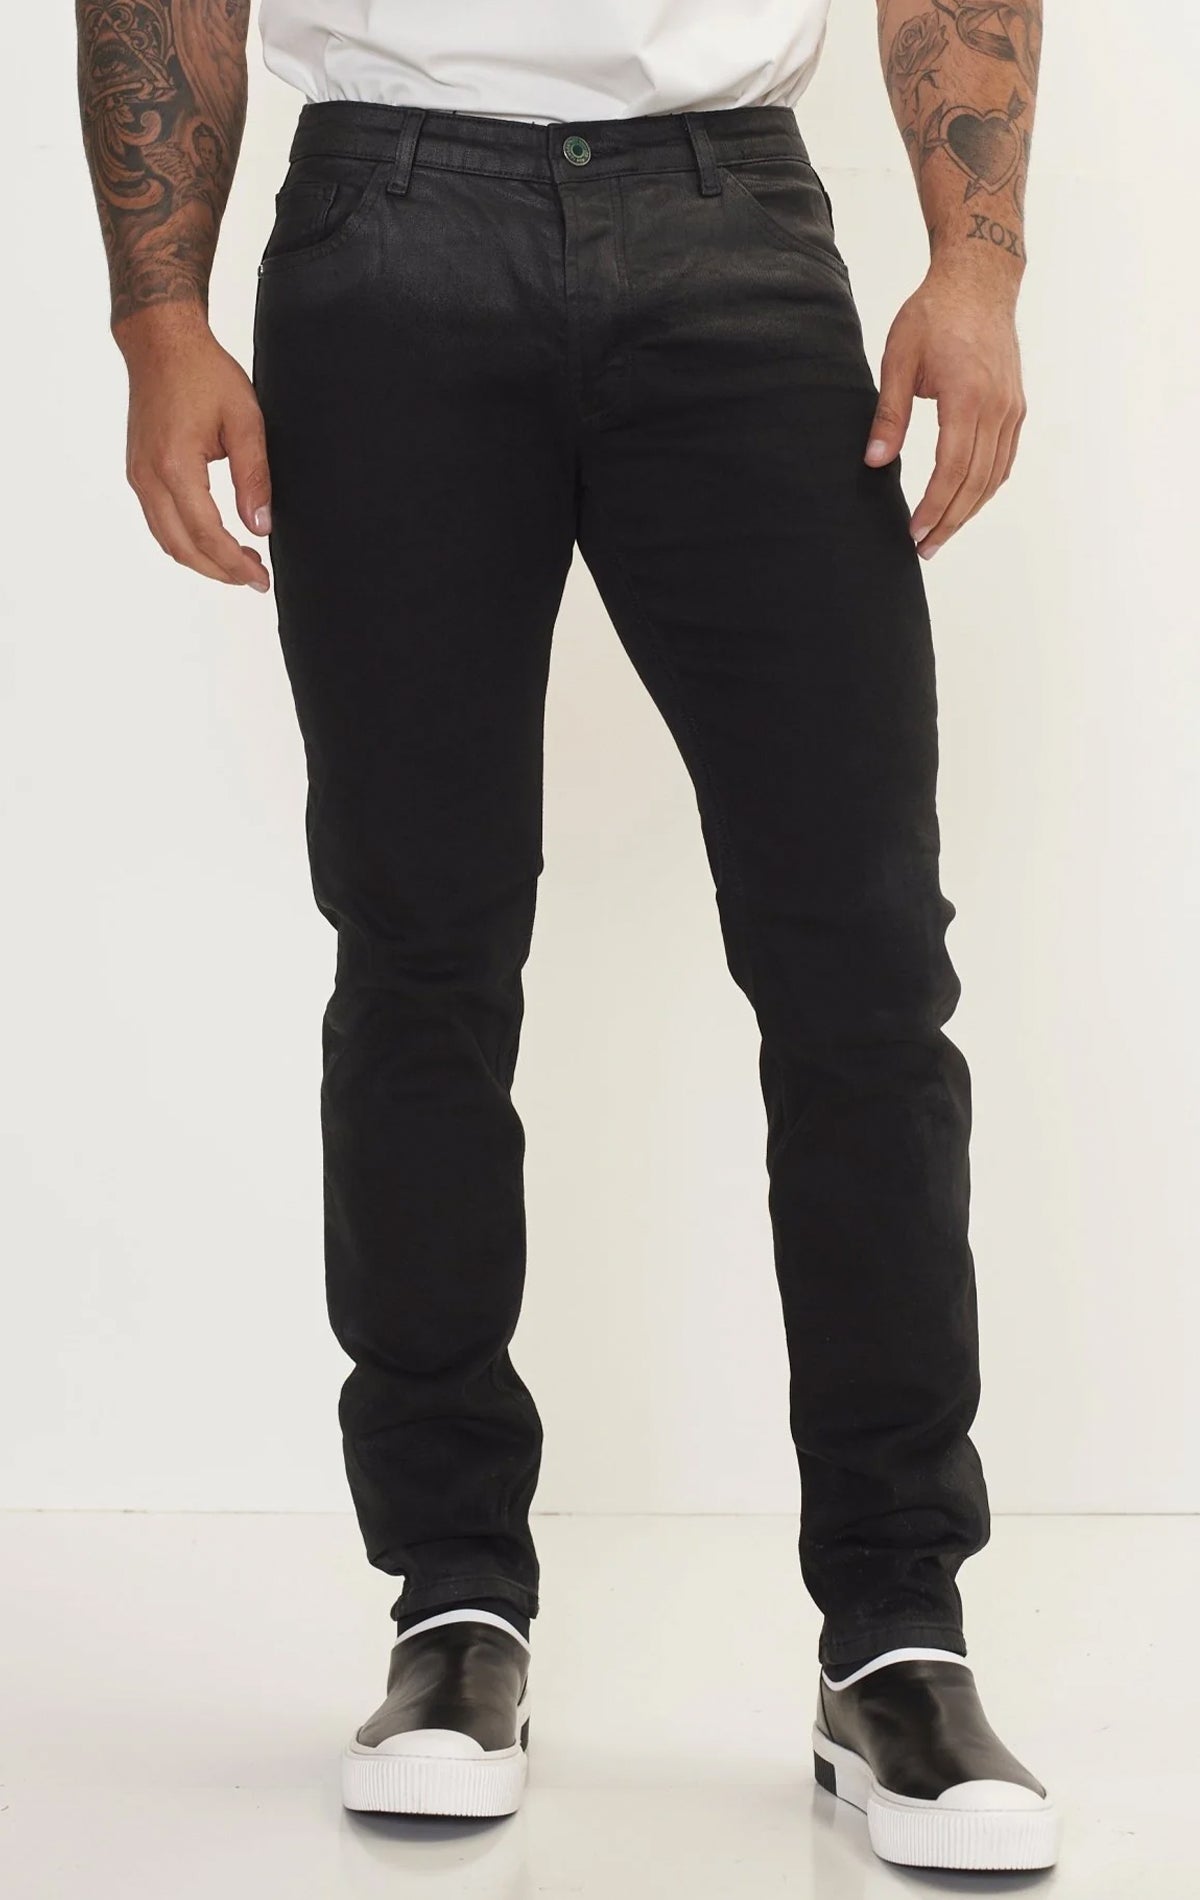 Men's side waxed tapered jeans in black. The jeans are made from premium quality denim (98% cotton, 2% lycra) and feature a tailored fit, meticulously applied waxed detailing along the side seams, and a tapered leg.